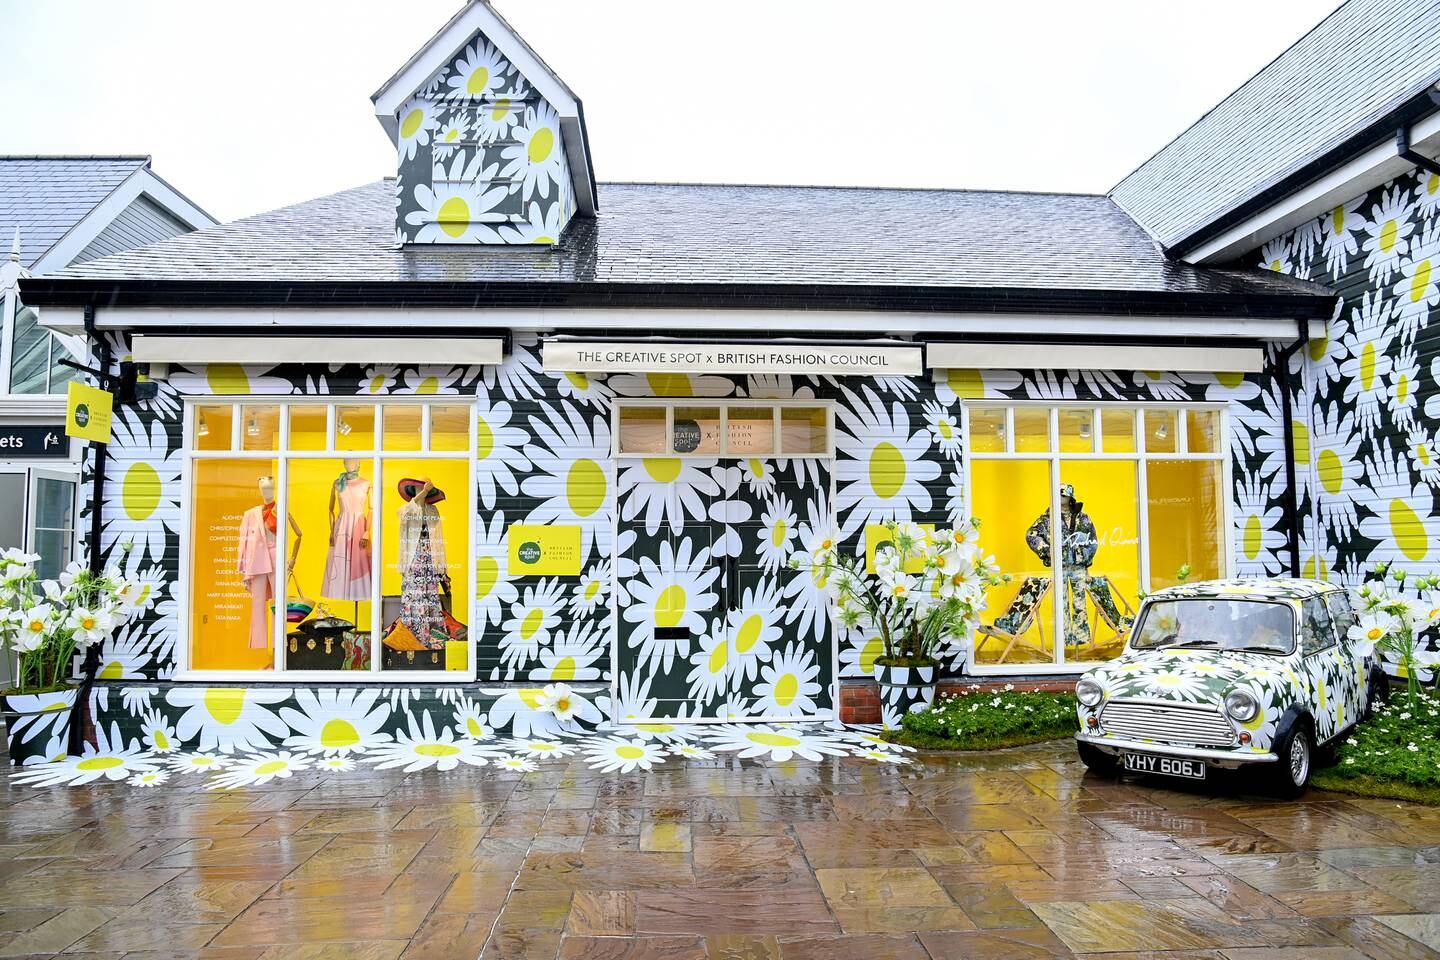 The Creative Spot x British Fashion Council at Bicester Village. Photo: The Bicester Collection